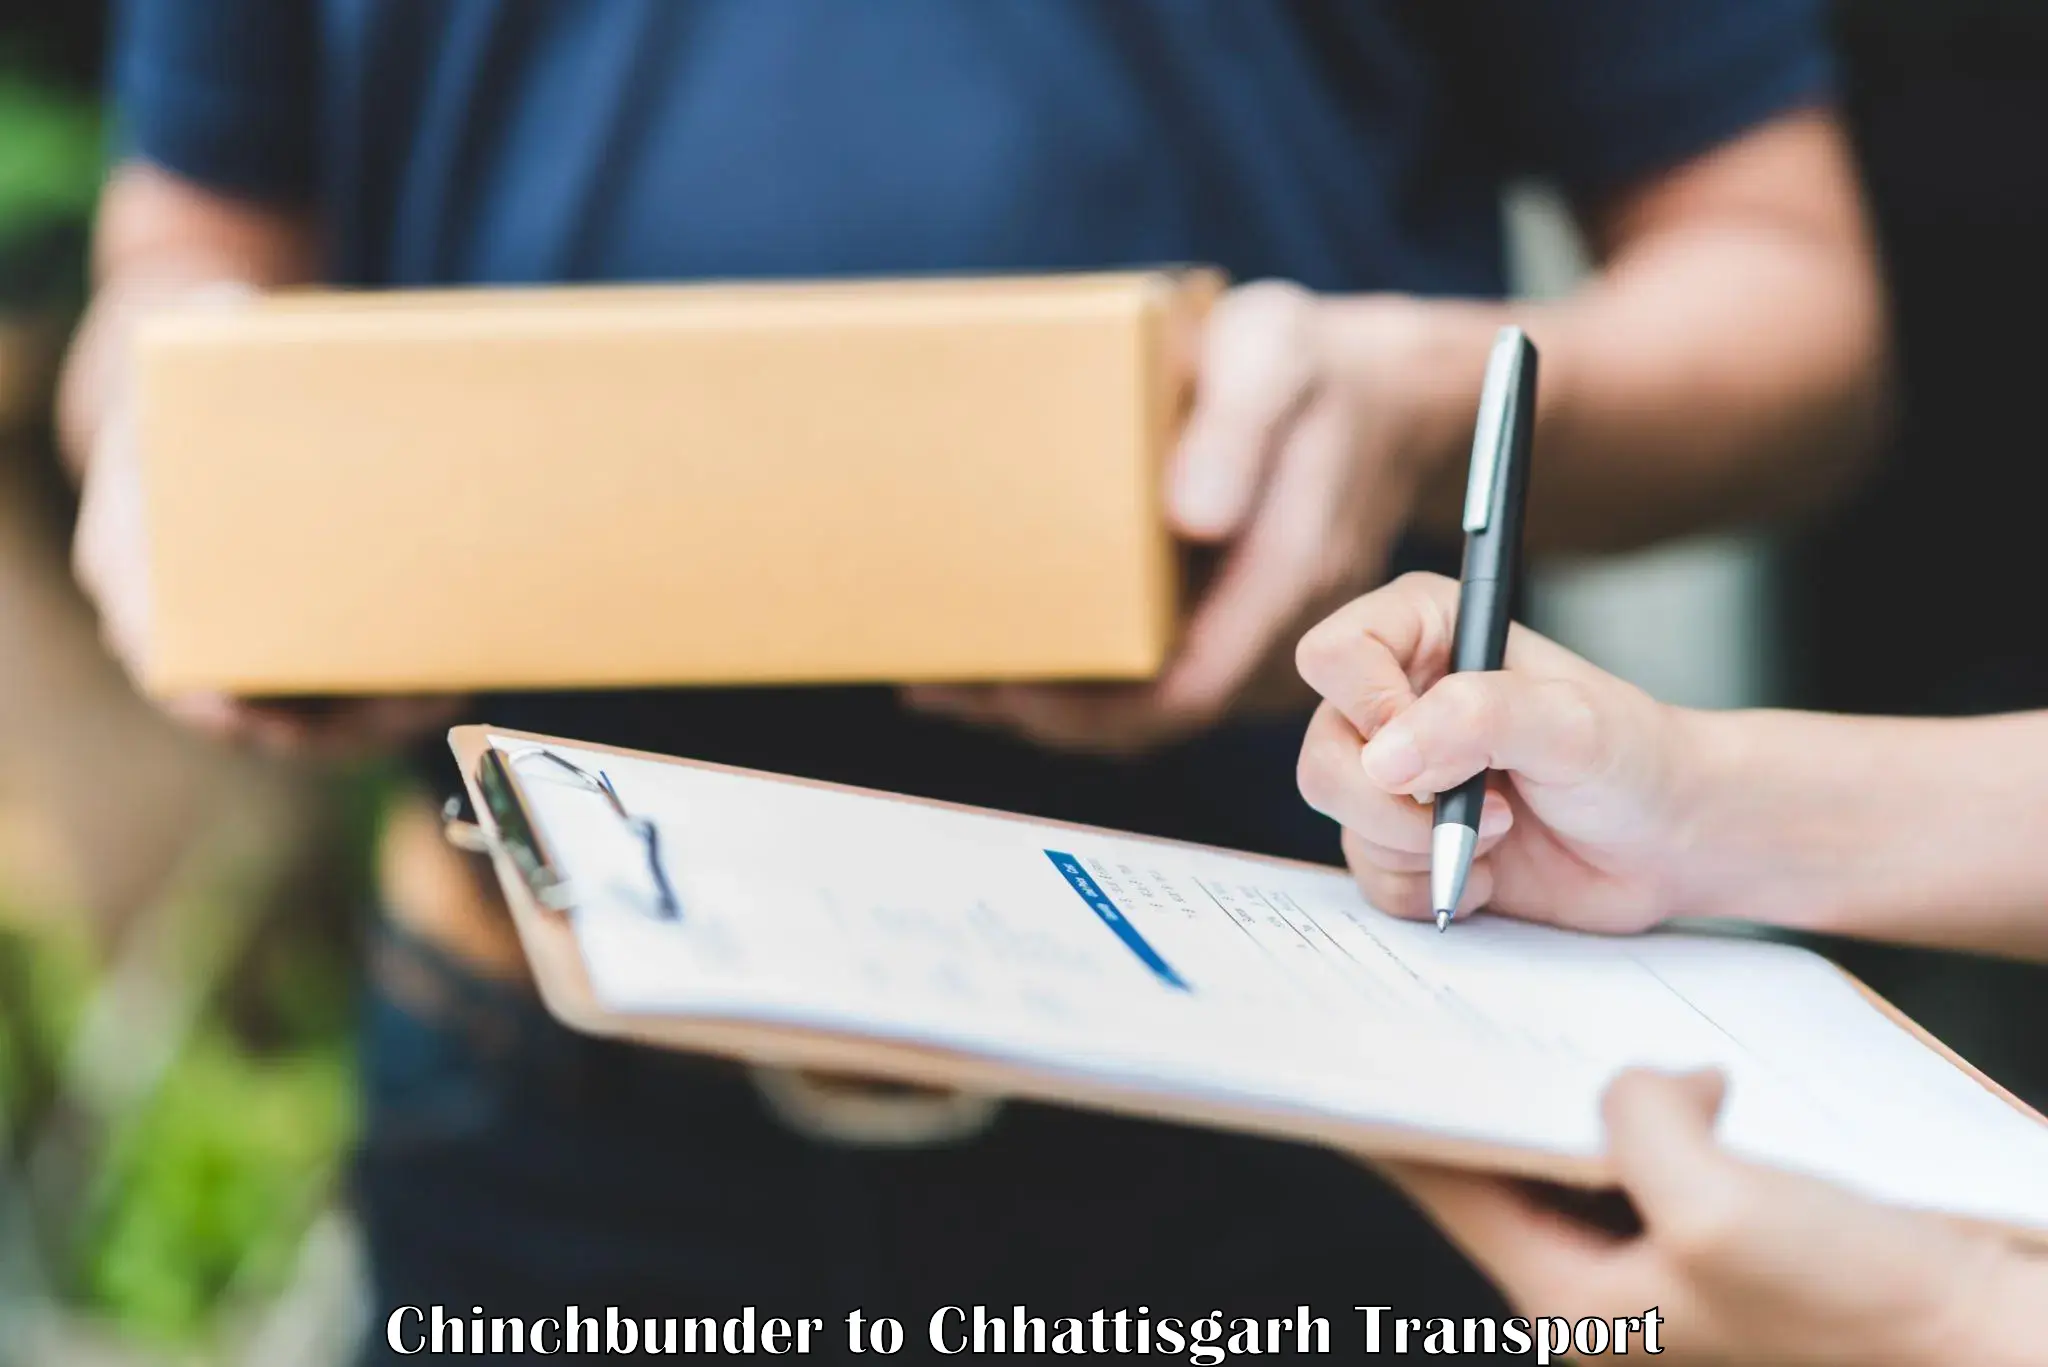 Container transport service Chinchbunder to Pathalgaon